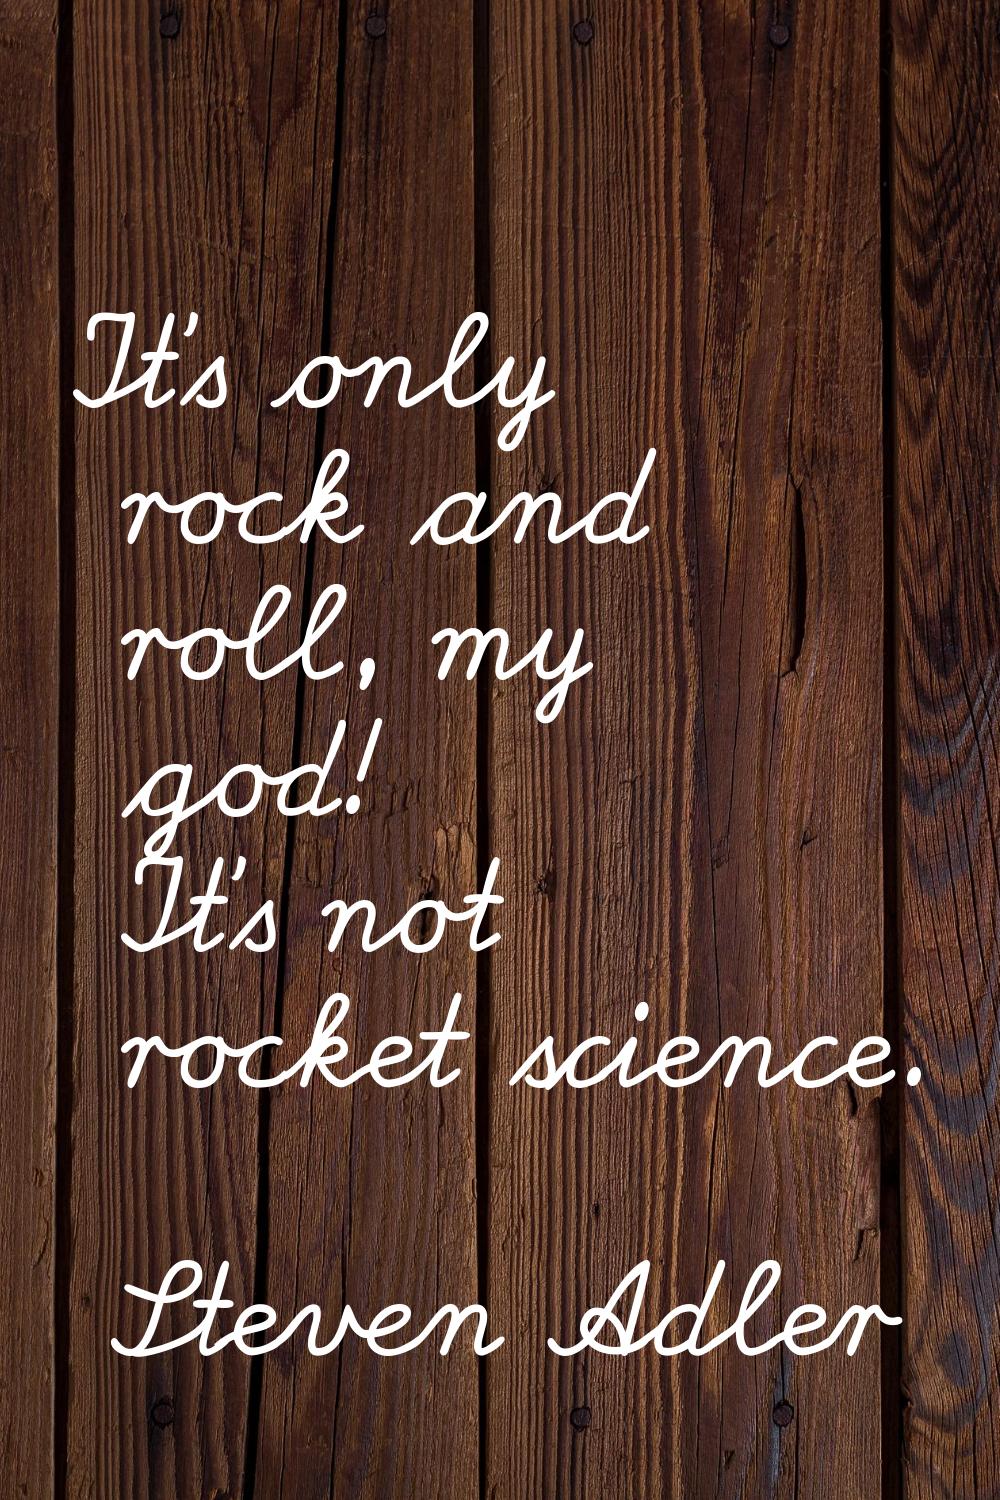 It's only rock and roll, my god! It's not rocket science.